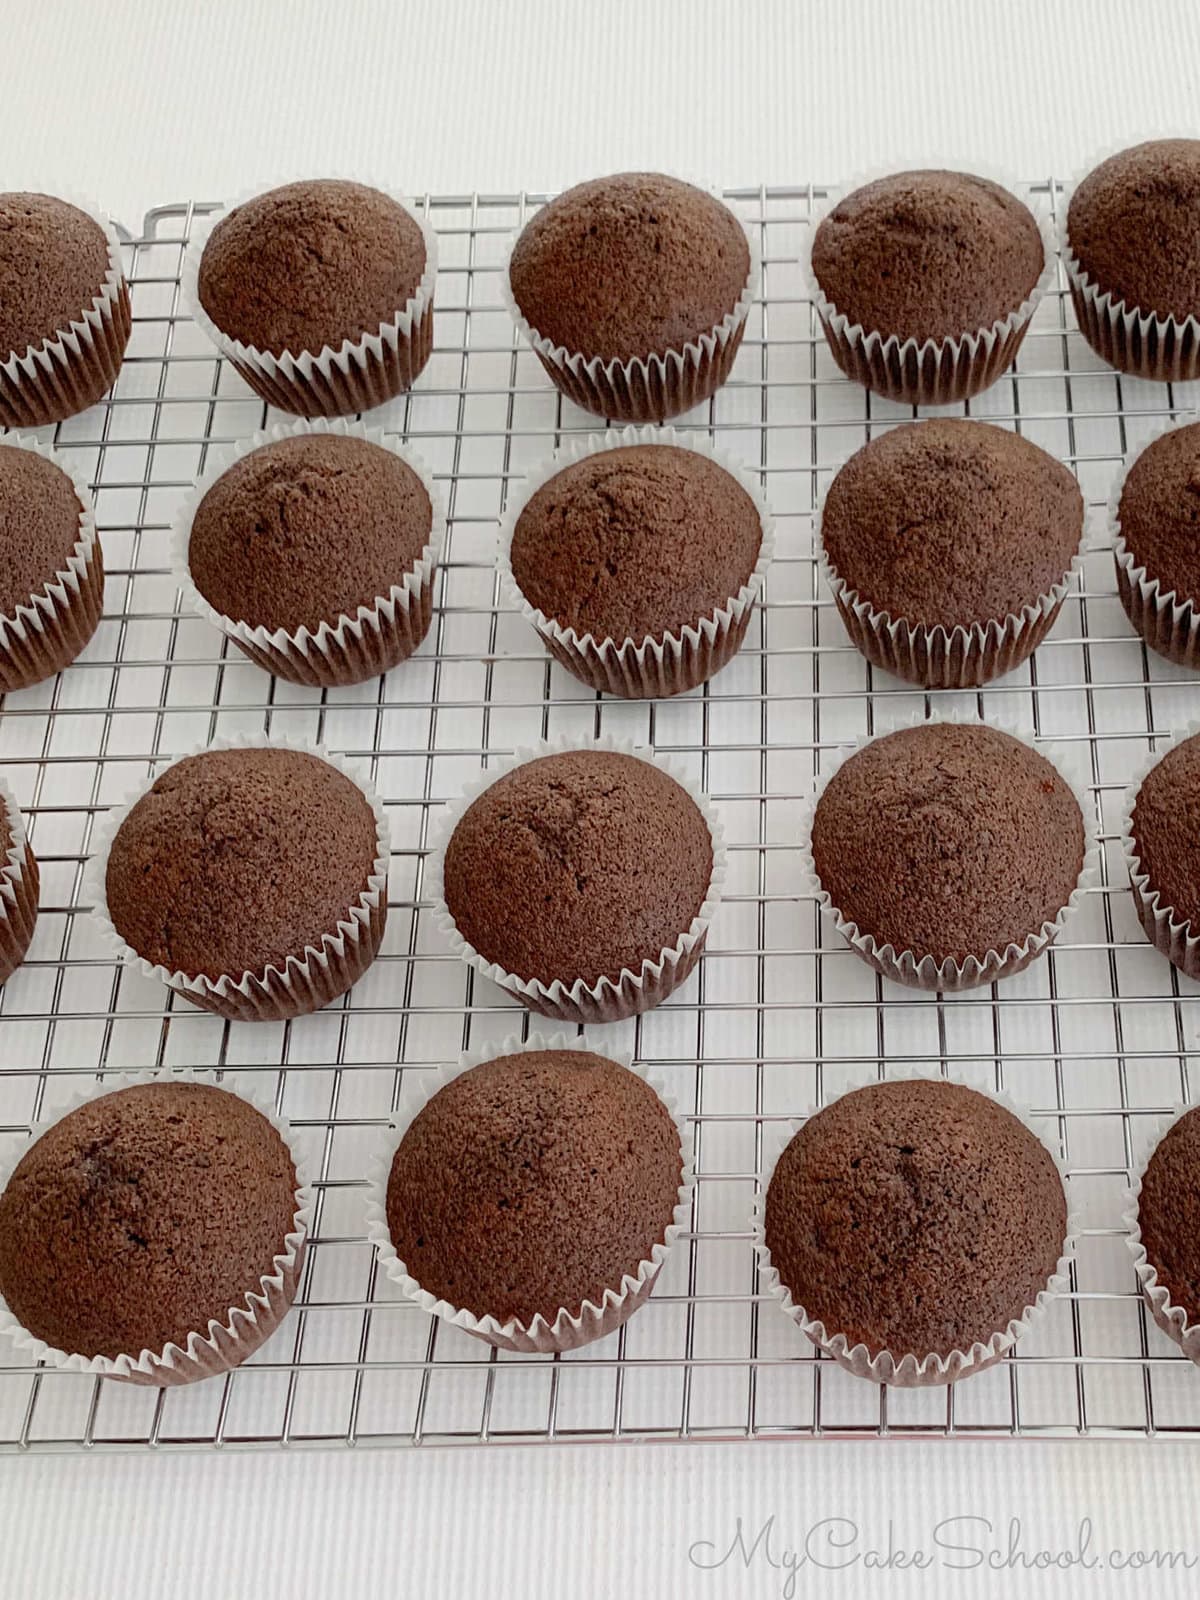 Freshly baked chocolate cupcakes on wire rack